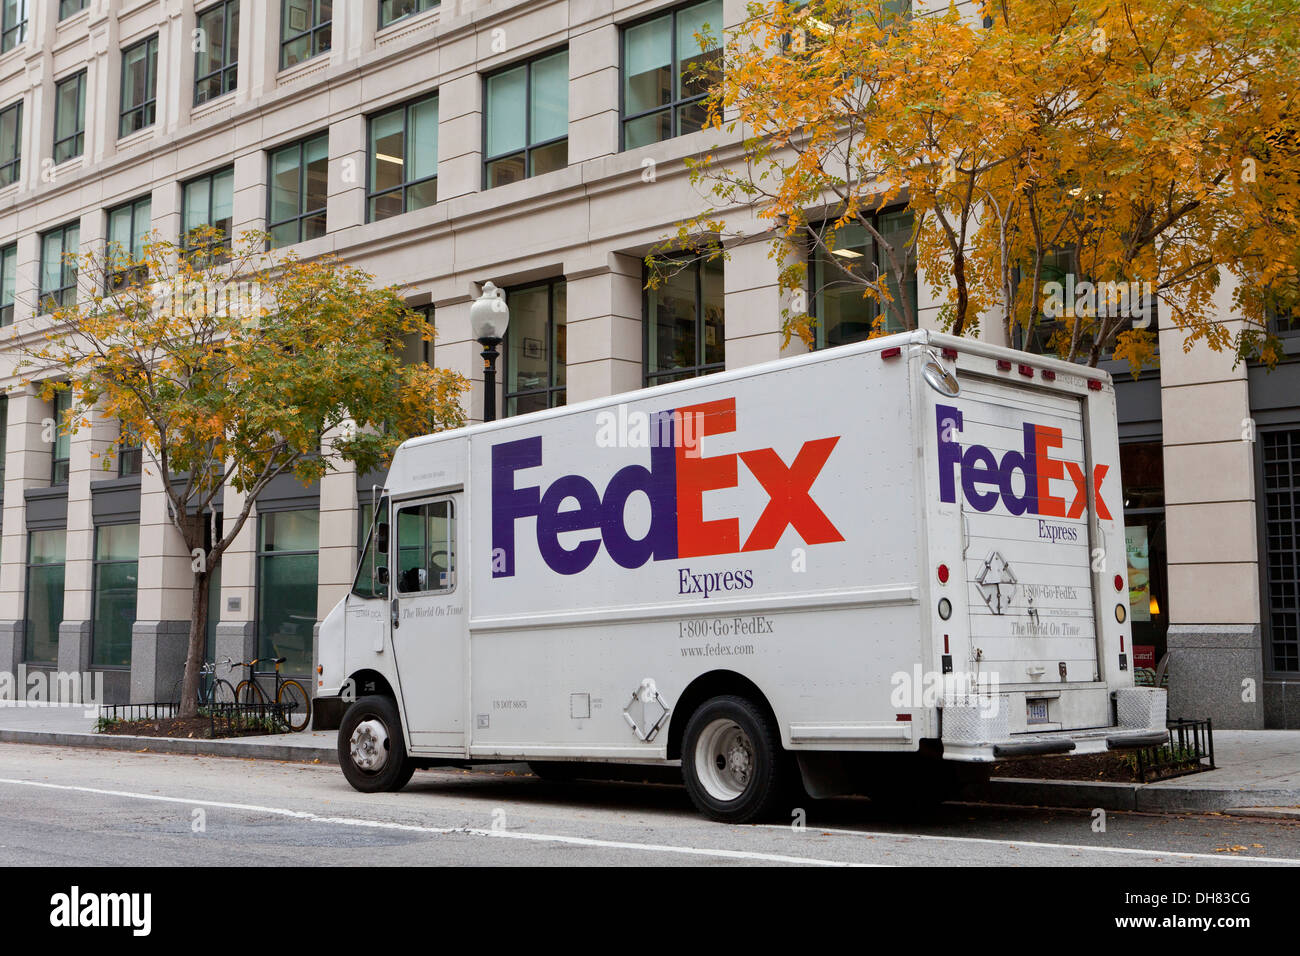 FedEx delivery truck in front of building Stock Photo